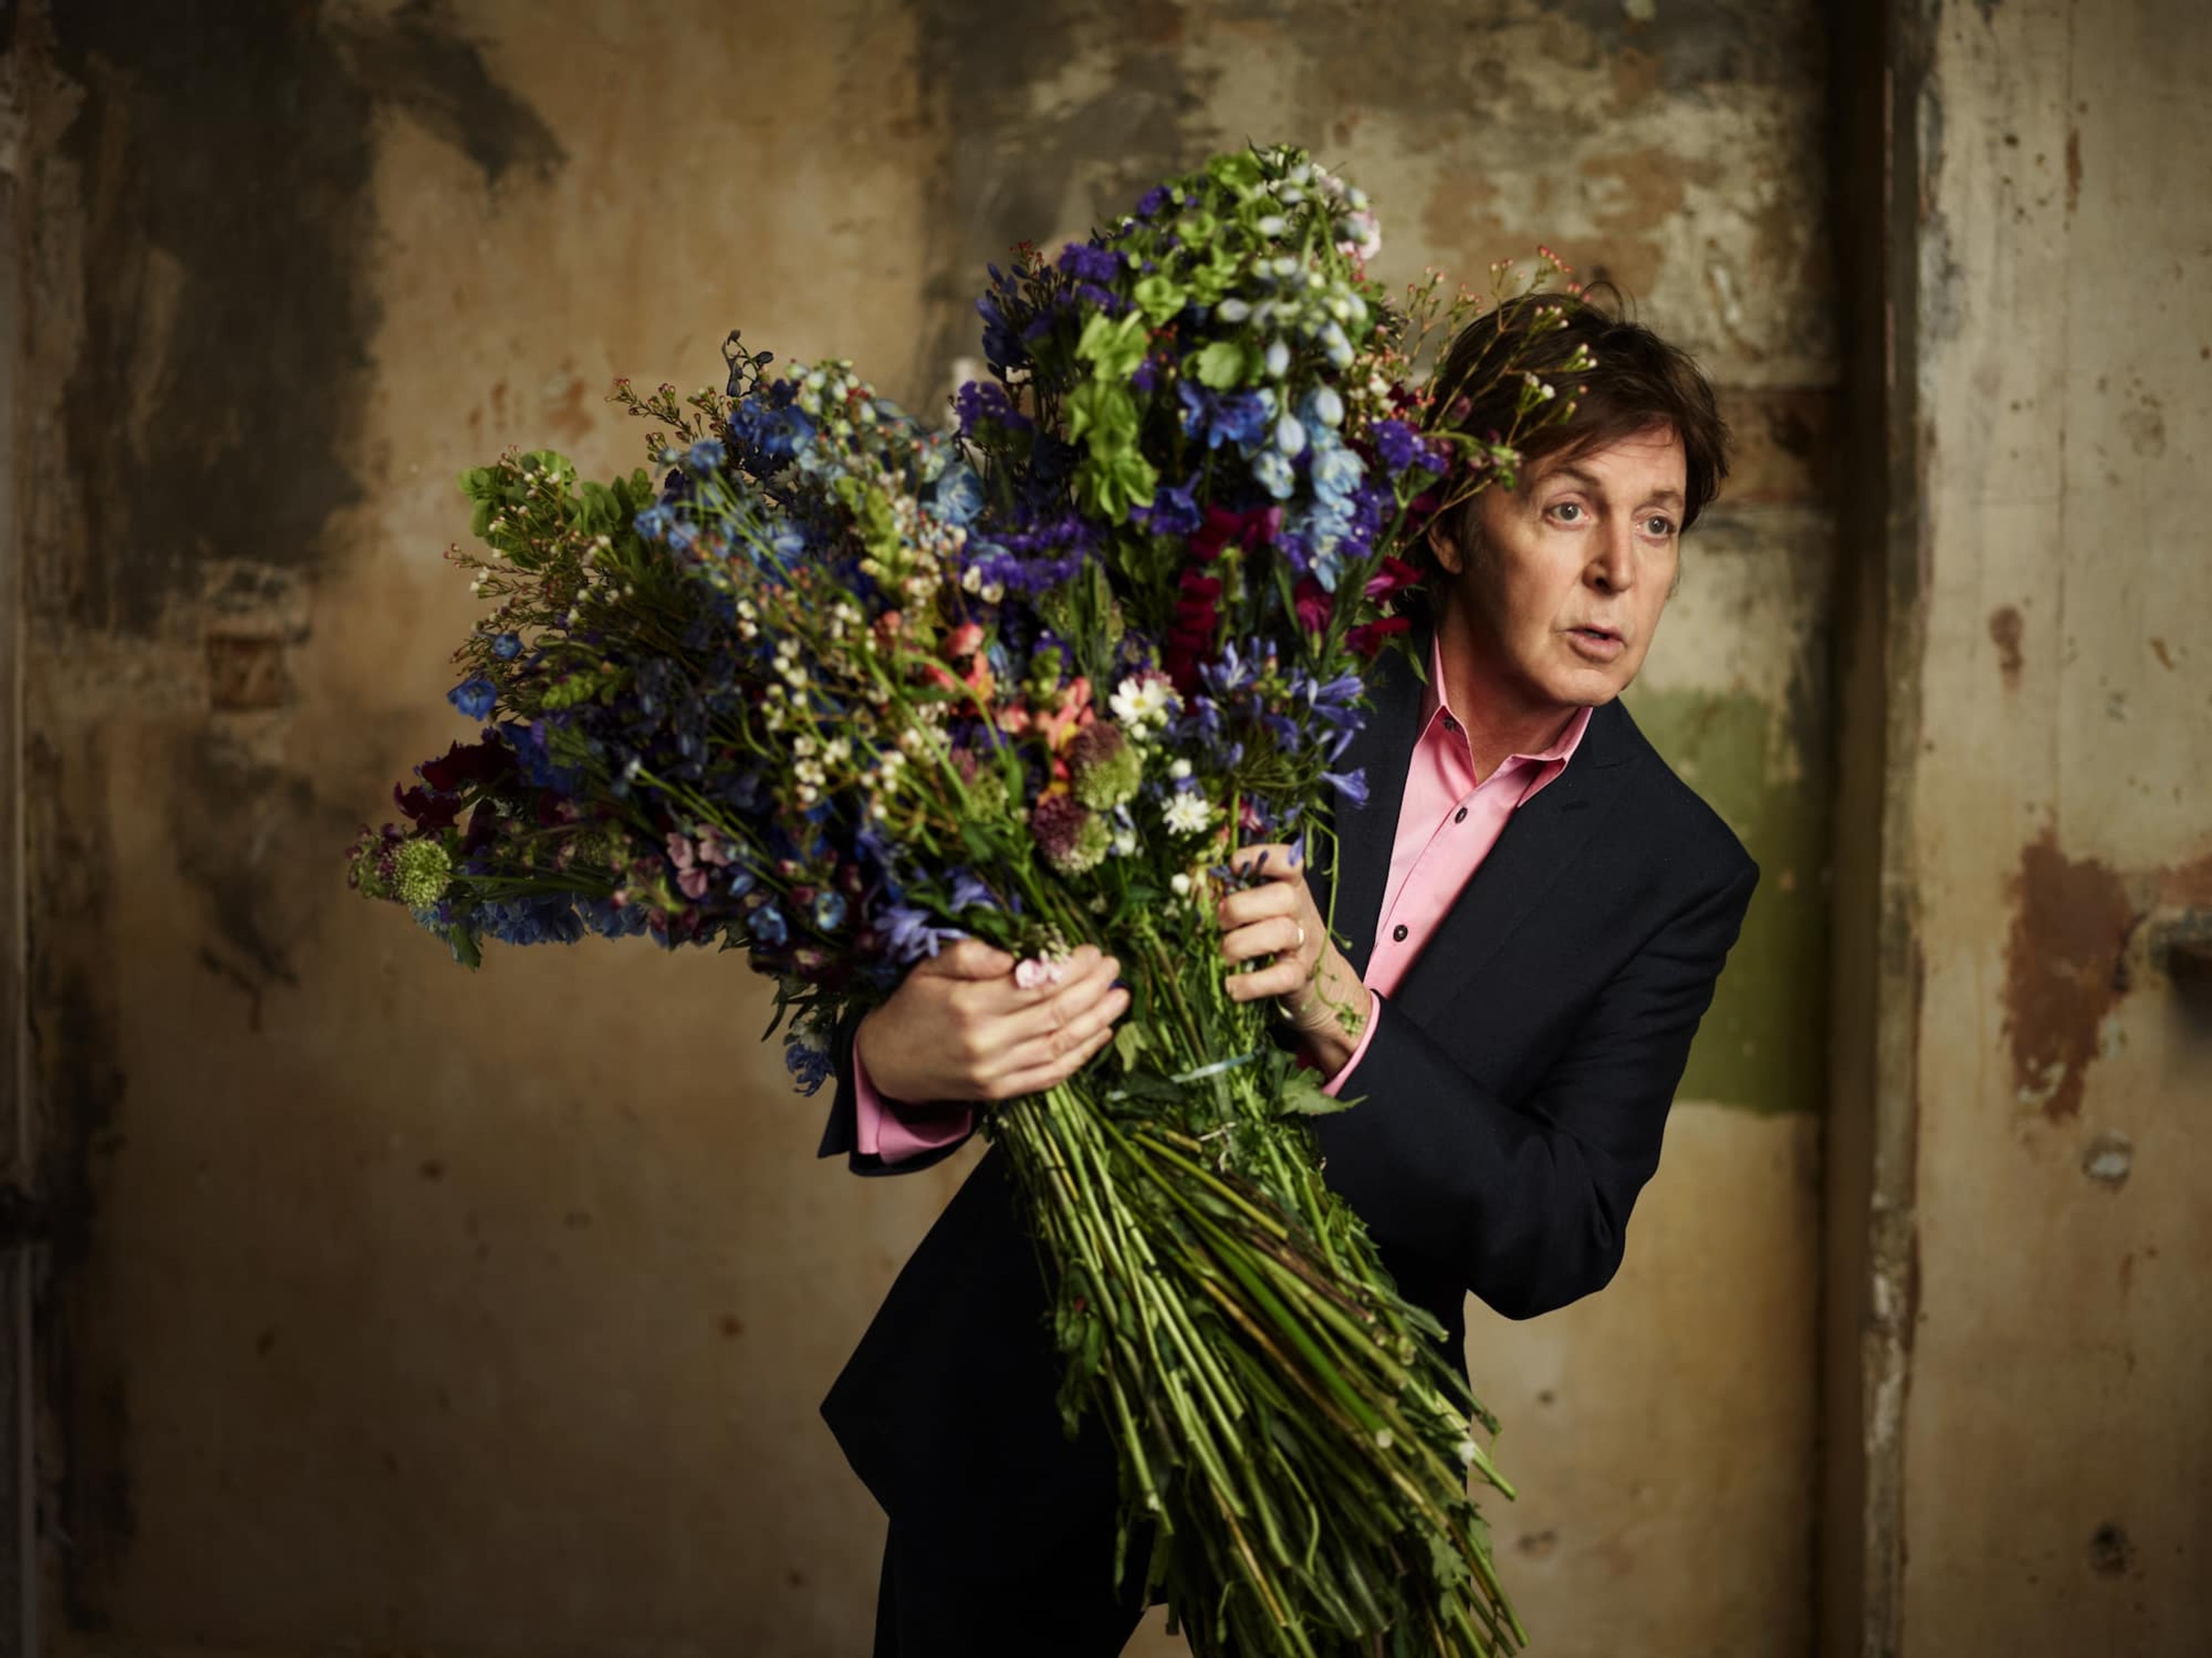 Photo of Paul holding flowers used to promote 'Kisses on the Bottom' 